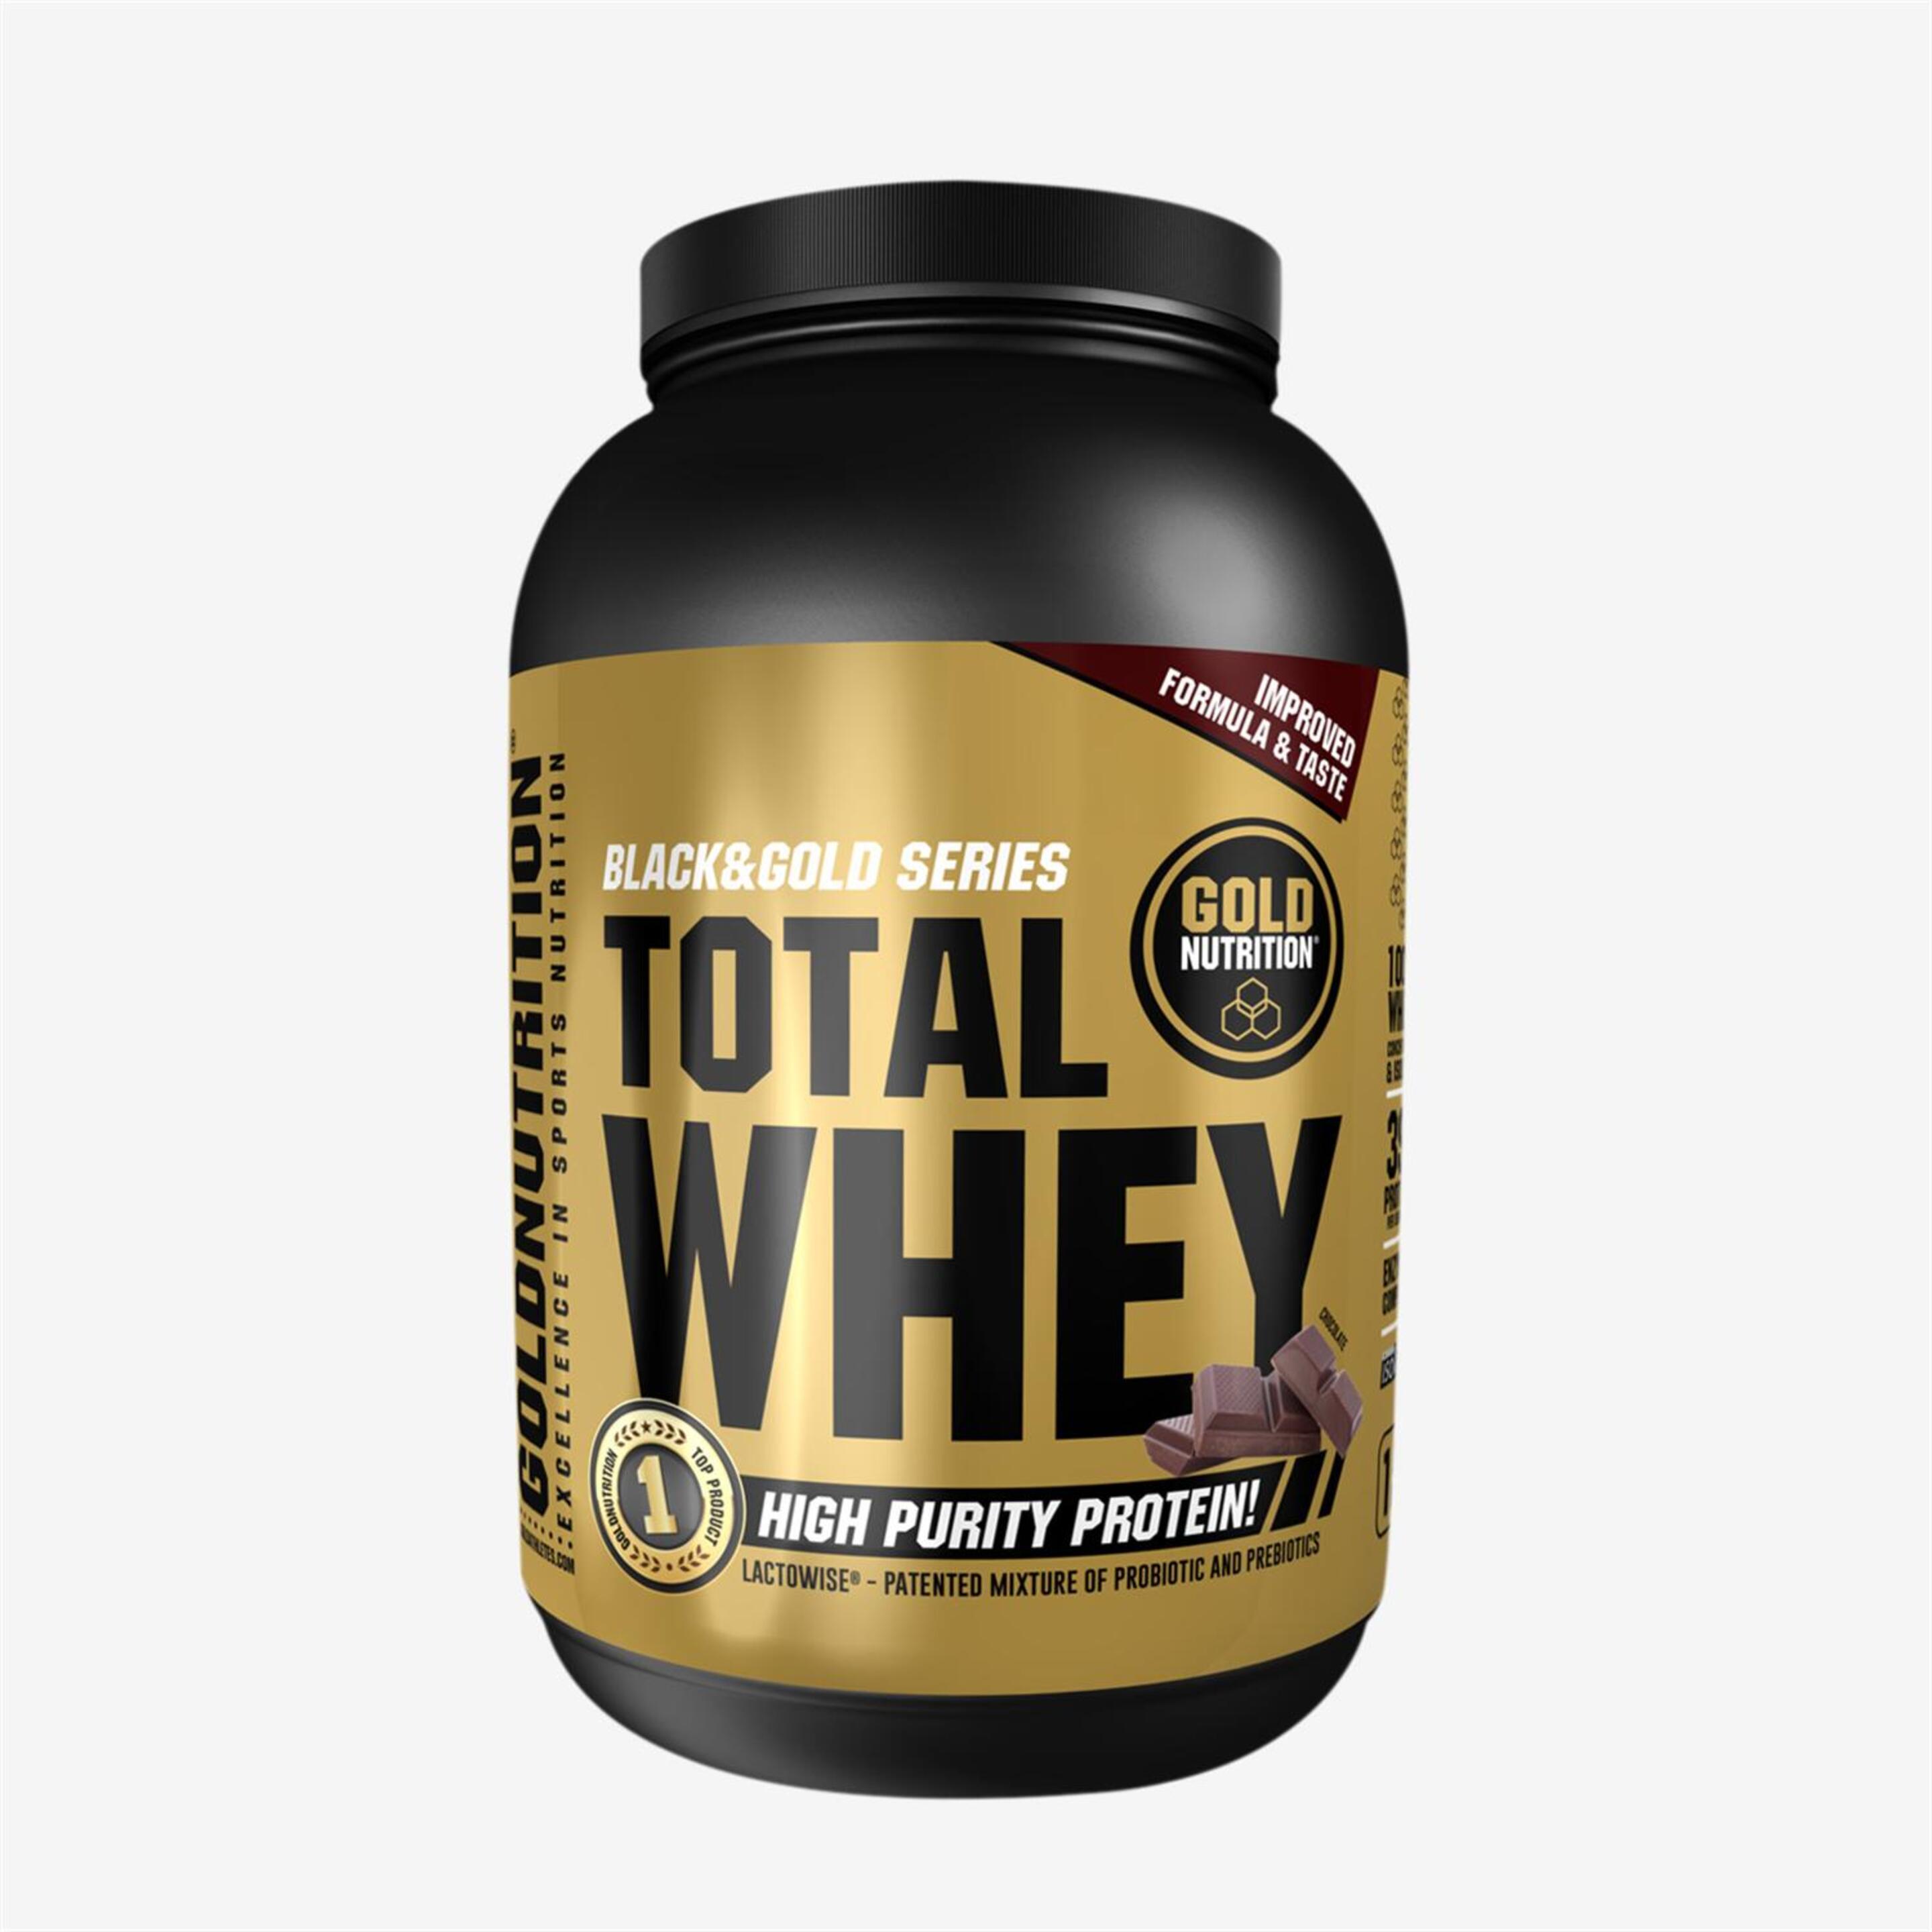 Proteina Whey Choco Gold Nutrition 1kg